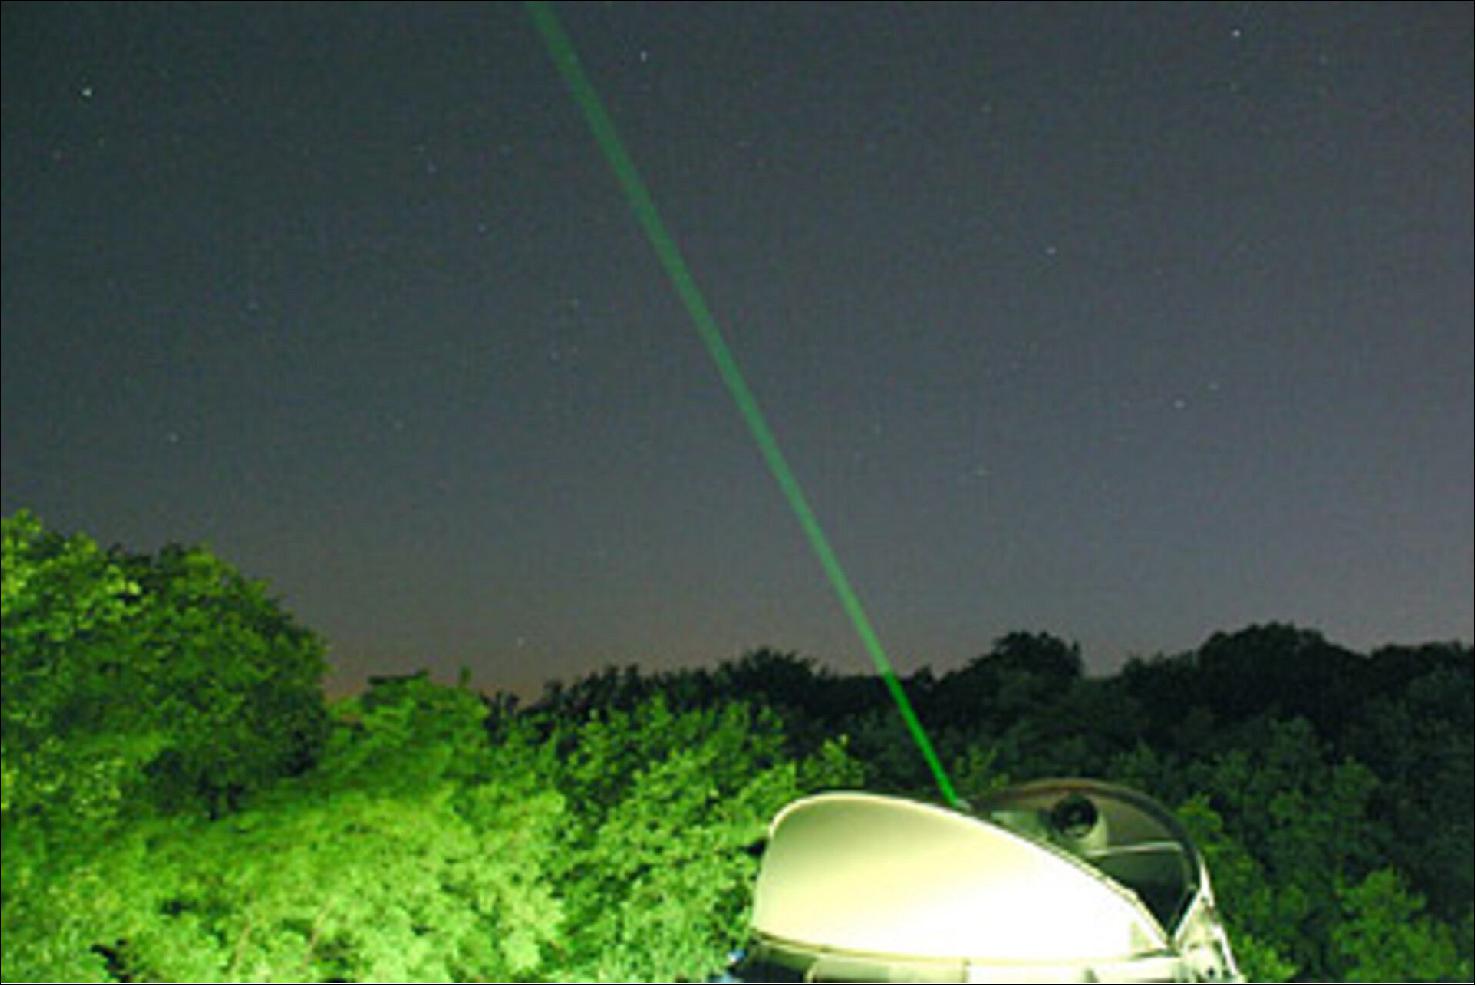 Figure 5: Satellite laser ranging station at Potsdam GFZ in Germany, part of a worldwide network known as the International Laser Ranging Service (image credit: DLR)